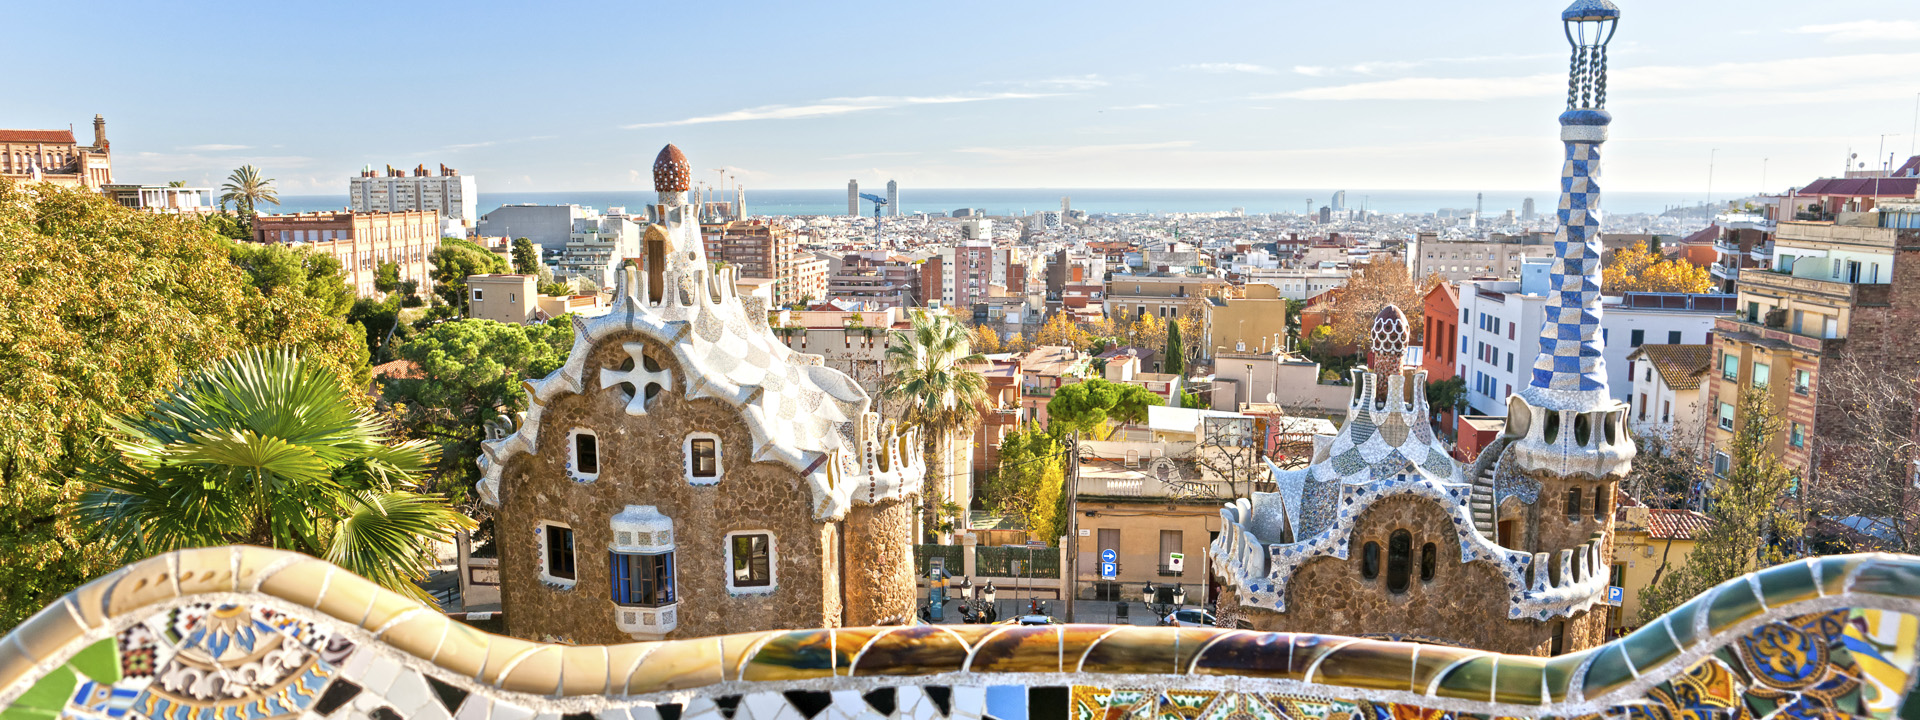 Breaking News: World Mobile Congress in Barcelona Canceled